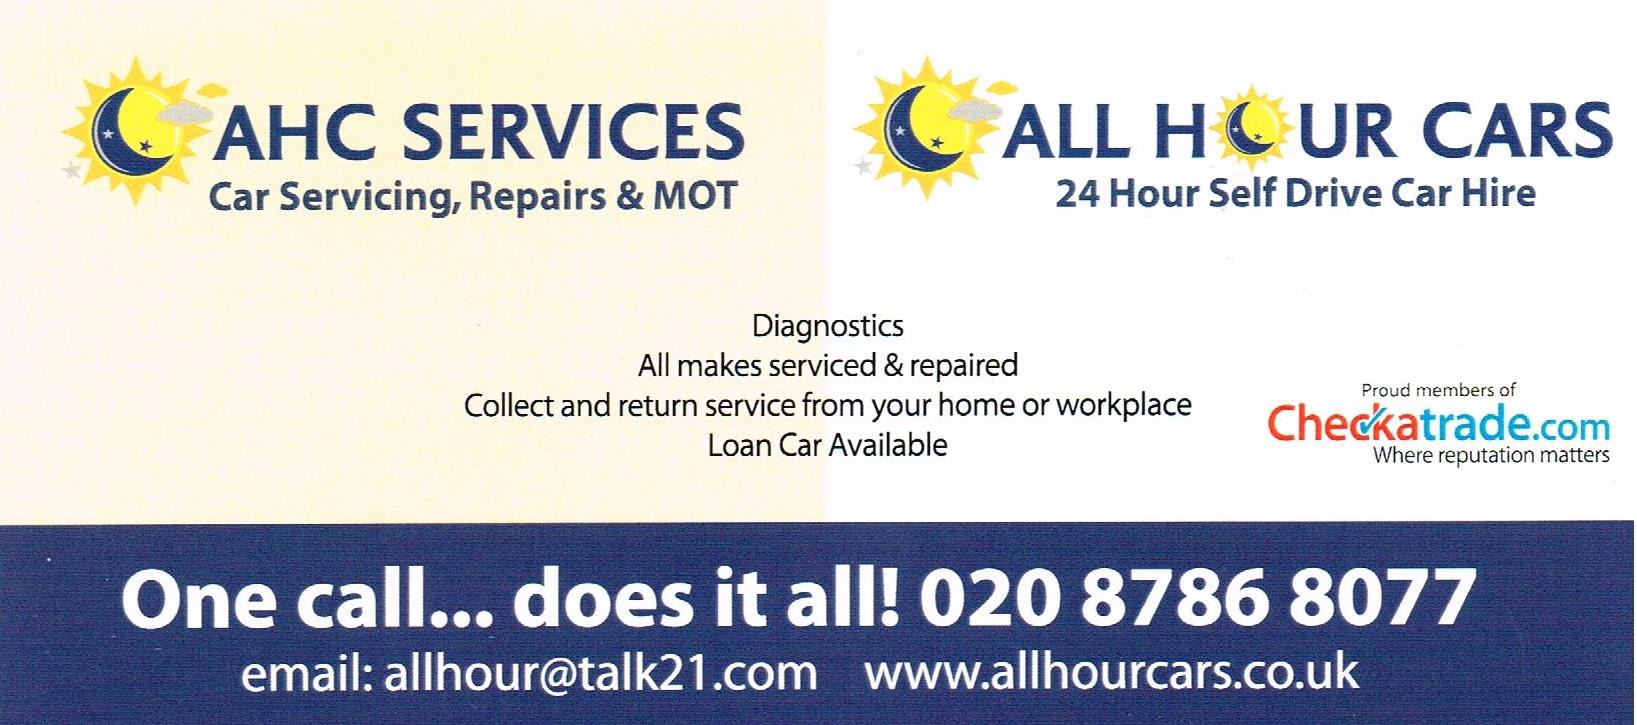 Images All Hour Cars A H C Services